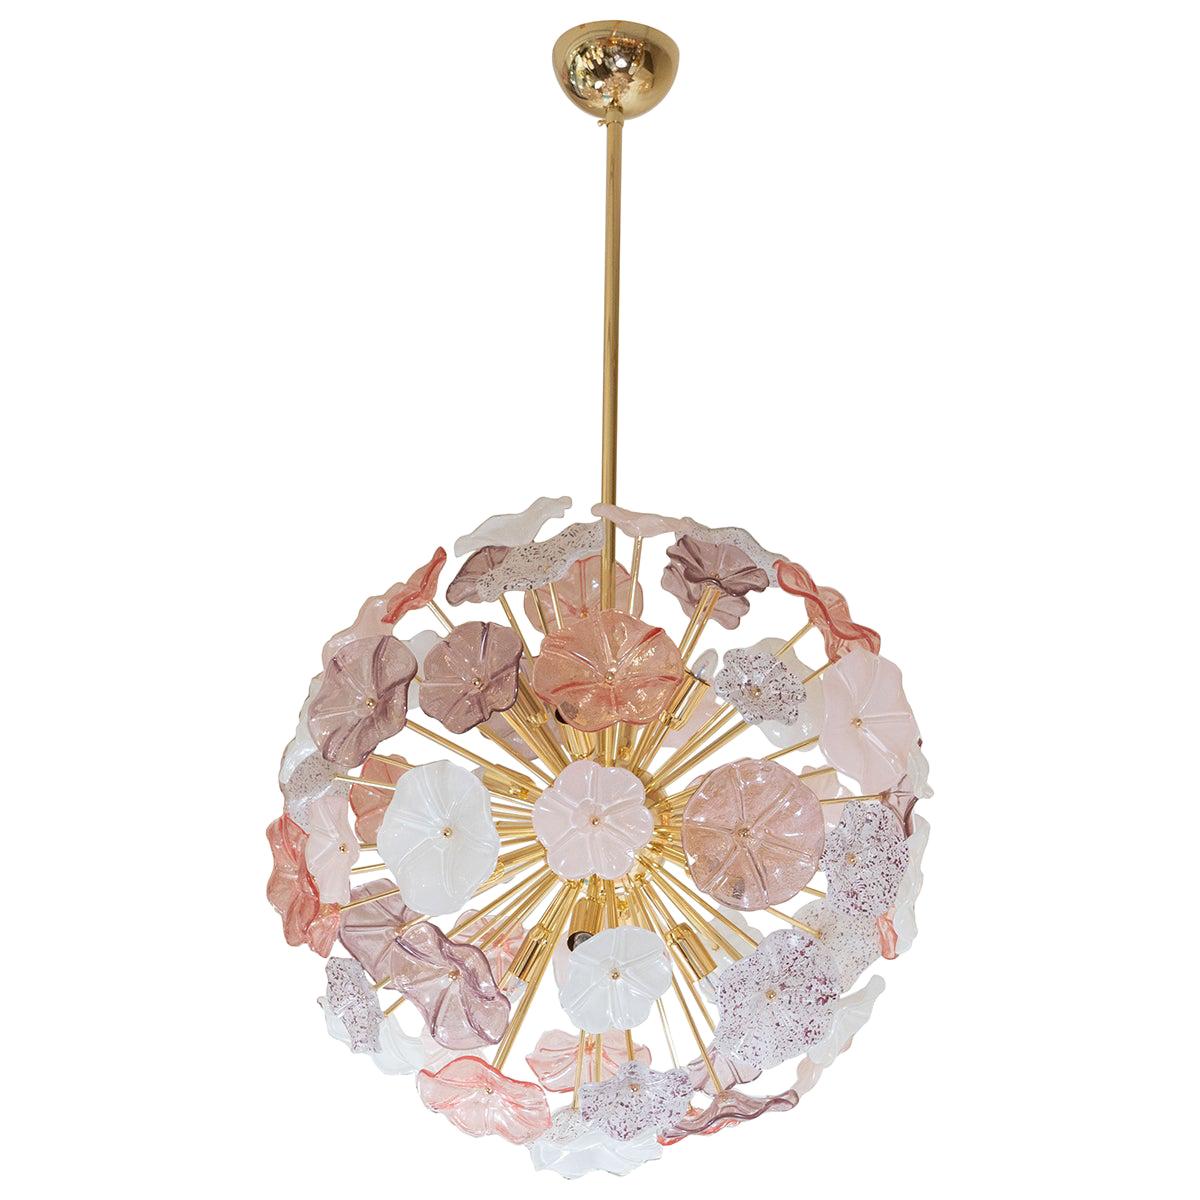 Brass Starburst Pendant Fixture with Pink and White Glass Floral Design